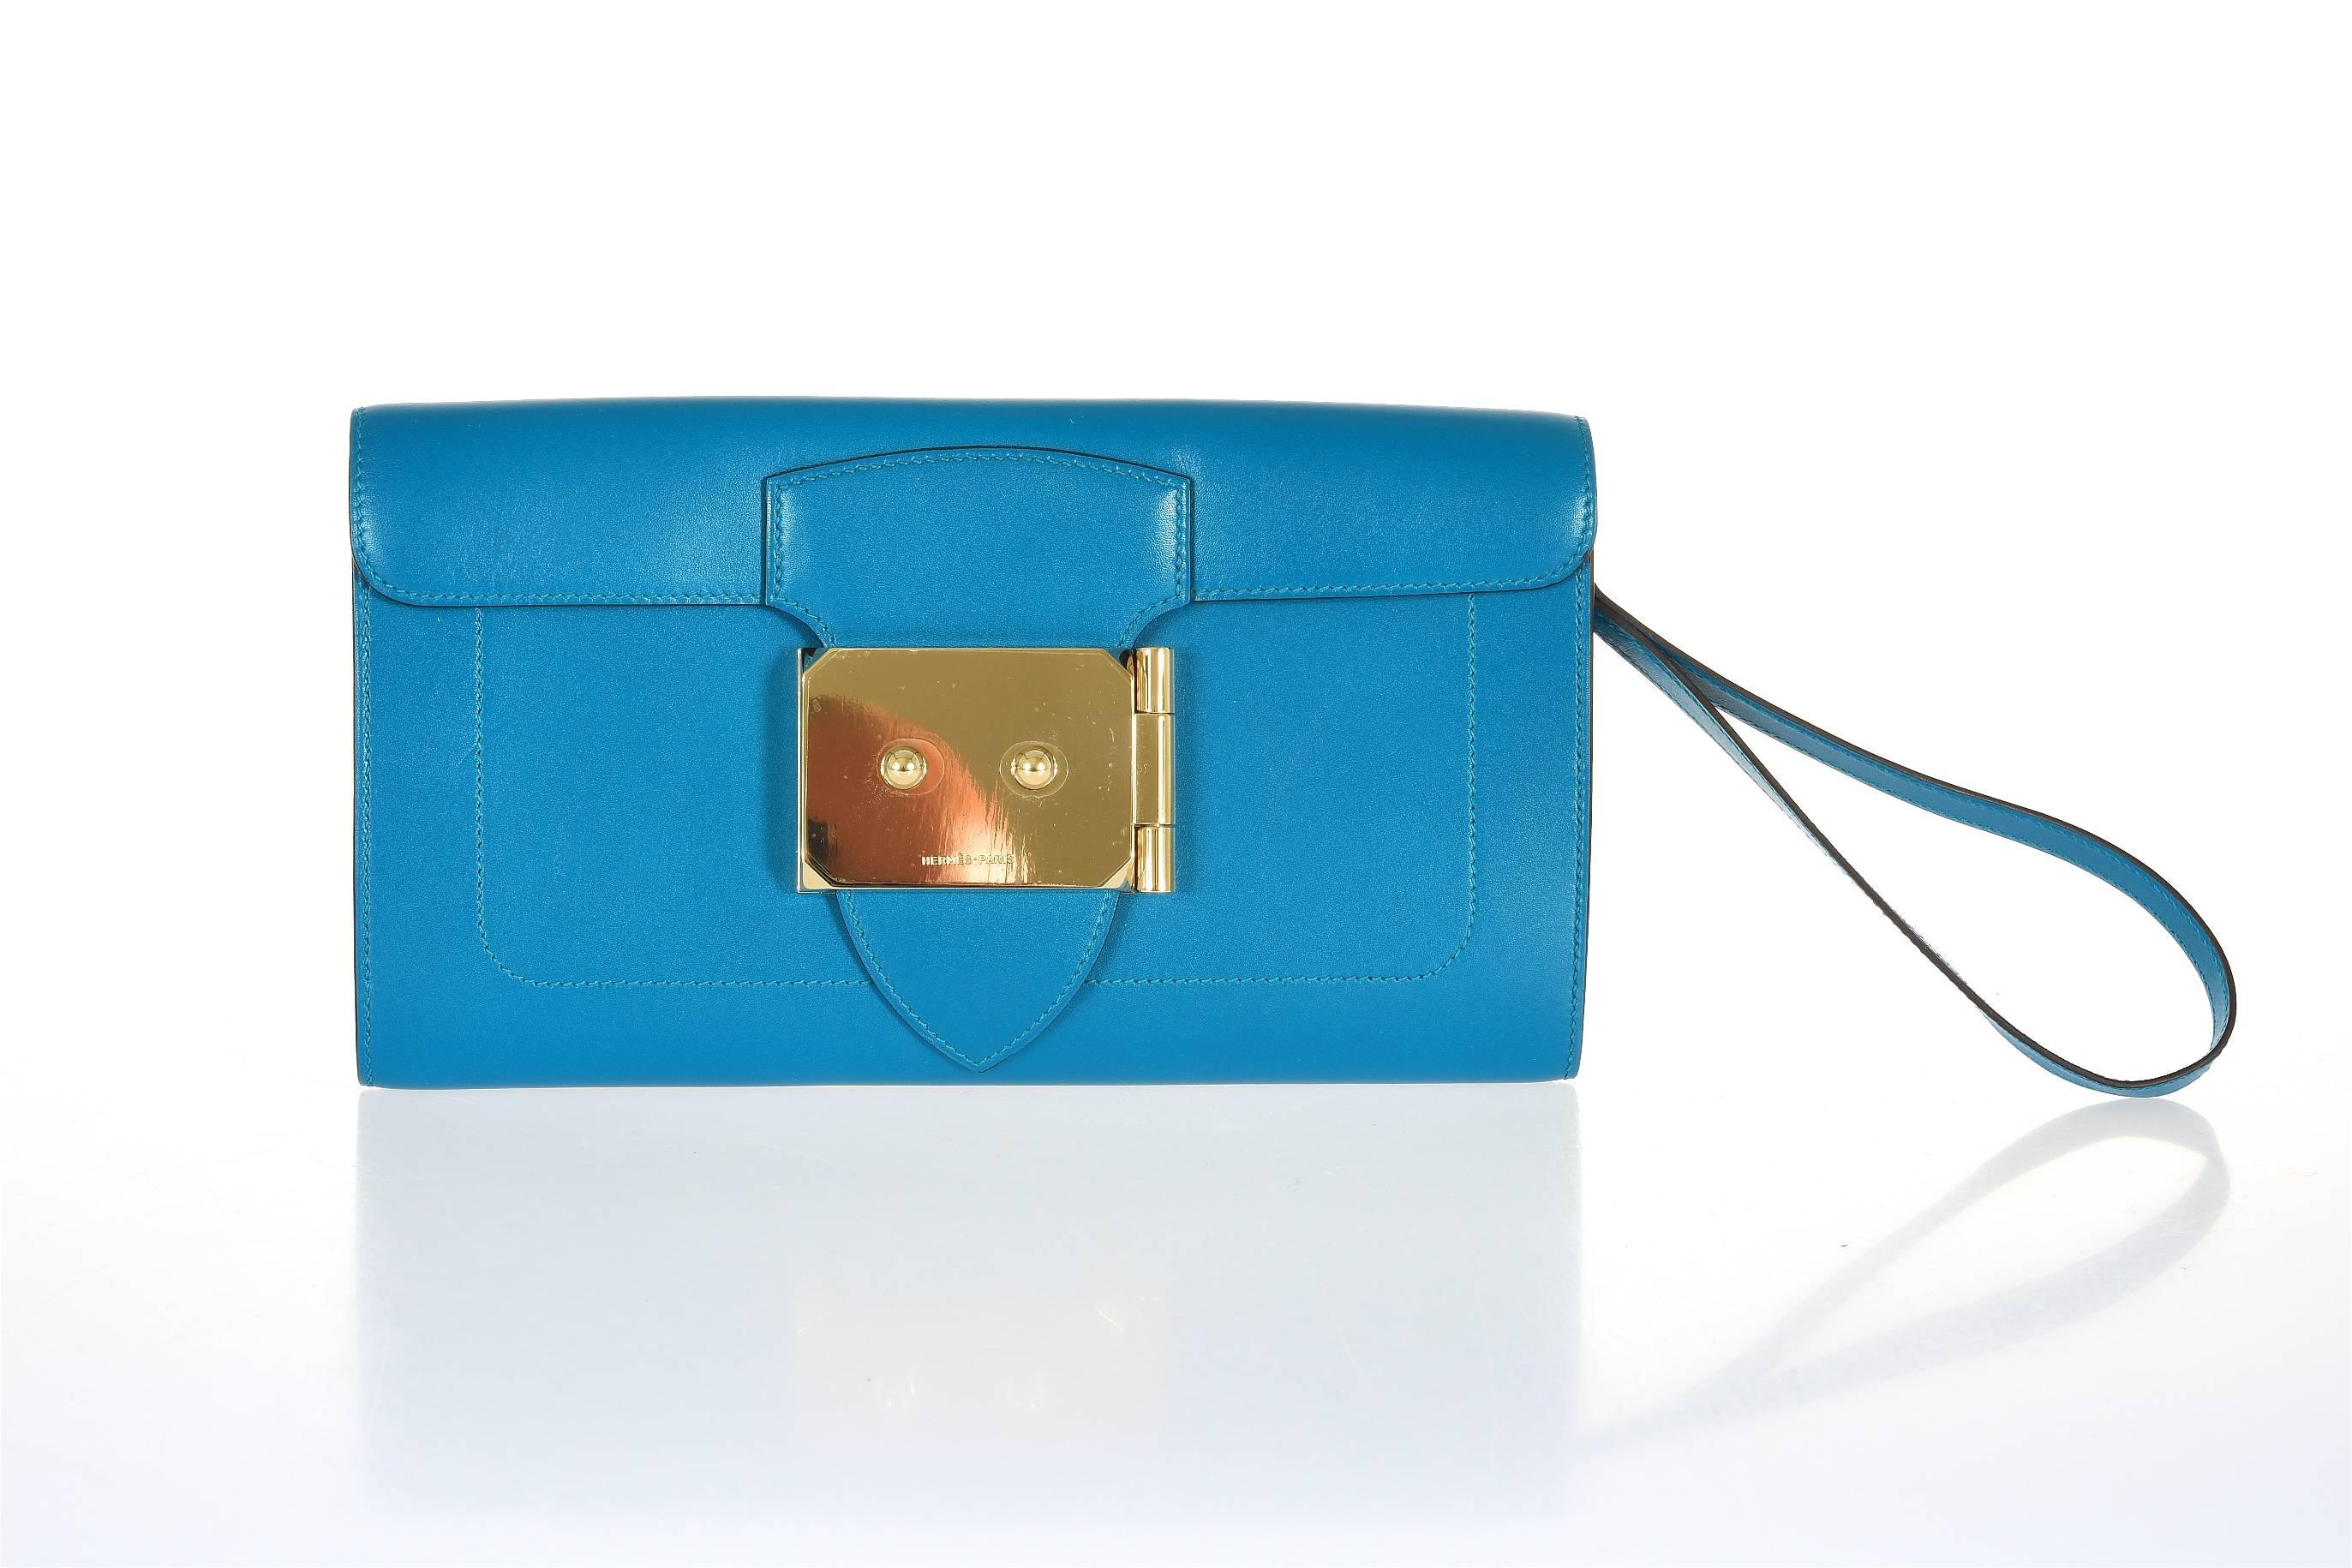 New Condition

Hermes Goodlock clutch in beautiful blue izmir with gold hardware.
The bag is brand new done in understated calf leather. 
T stamp plastic still on the hardware!
27.5cm x16cmx 3cm (11